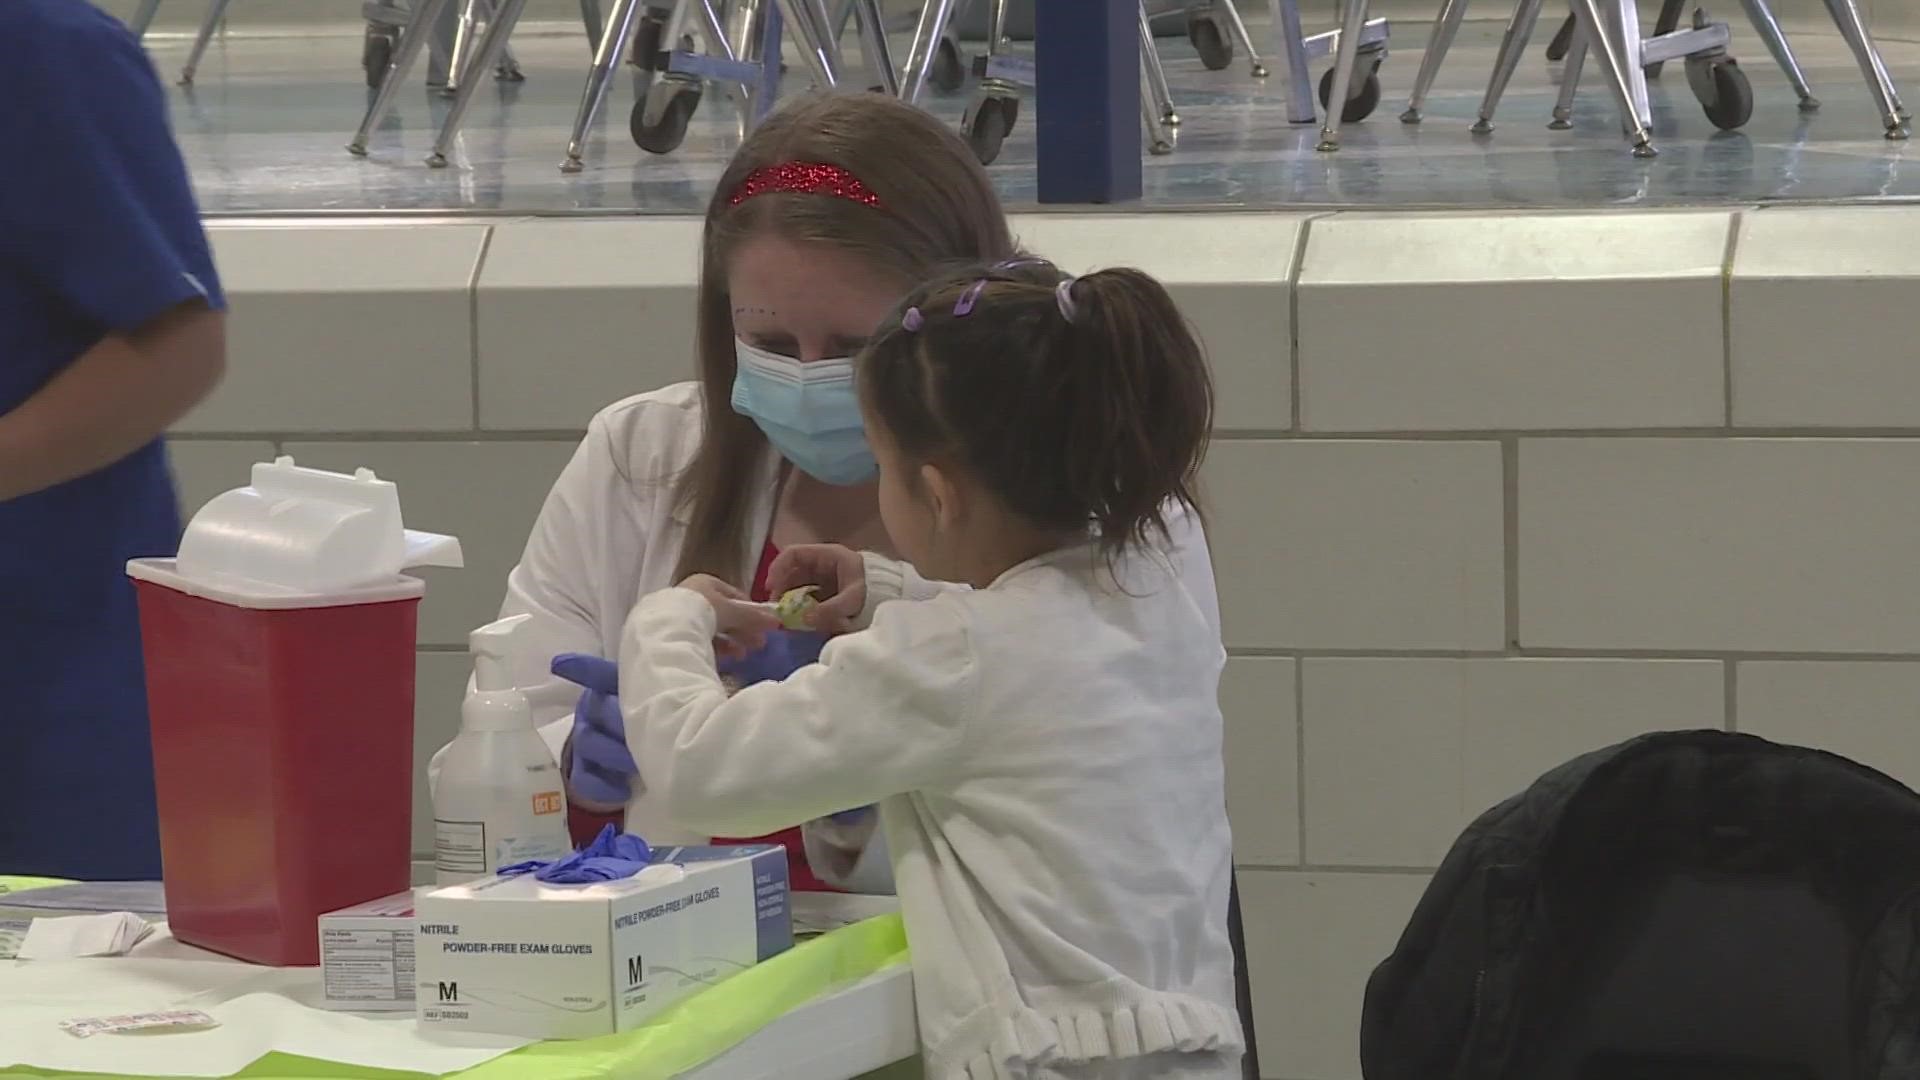 9News reporter Jennifer Meckles takes us to Thornton – for a special vaccine clinic for Afghan refugees.